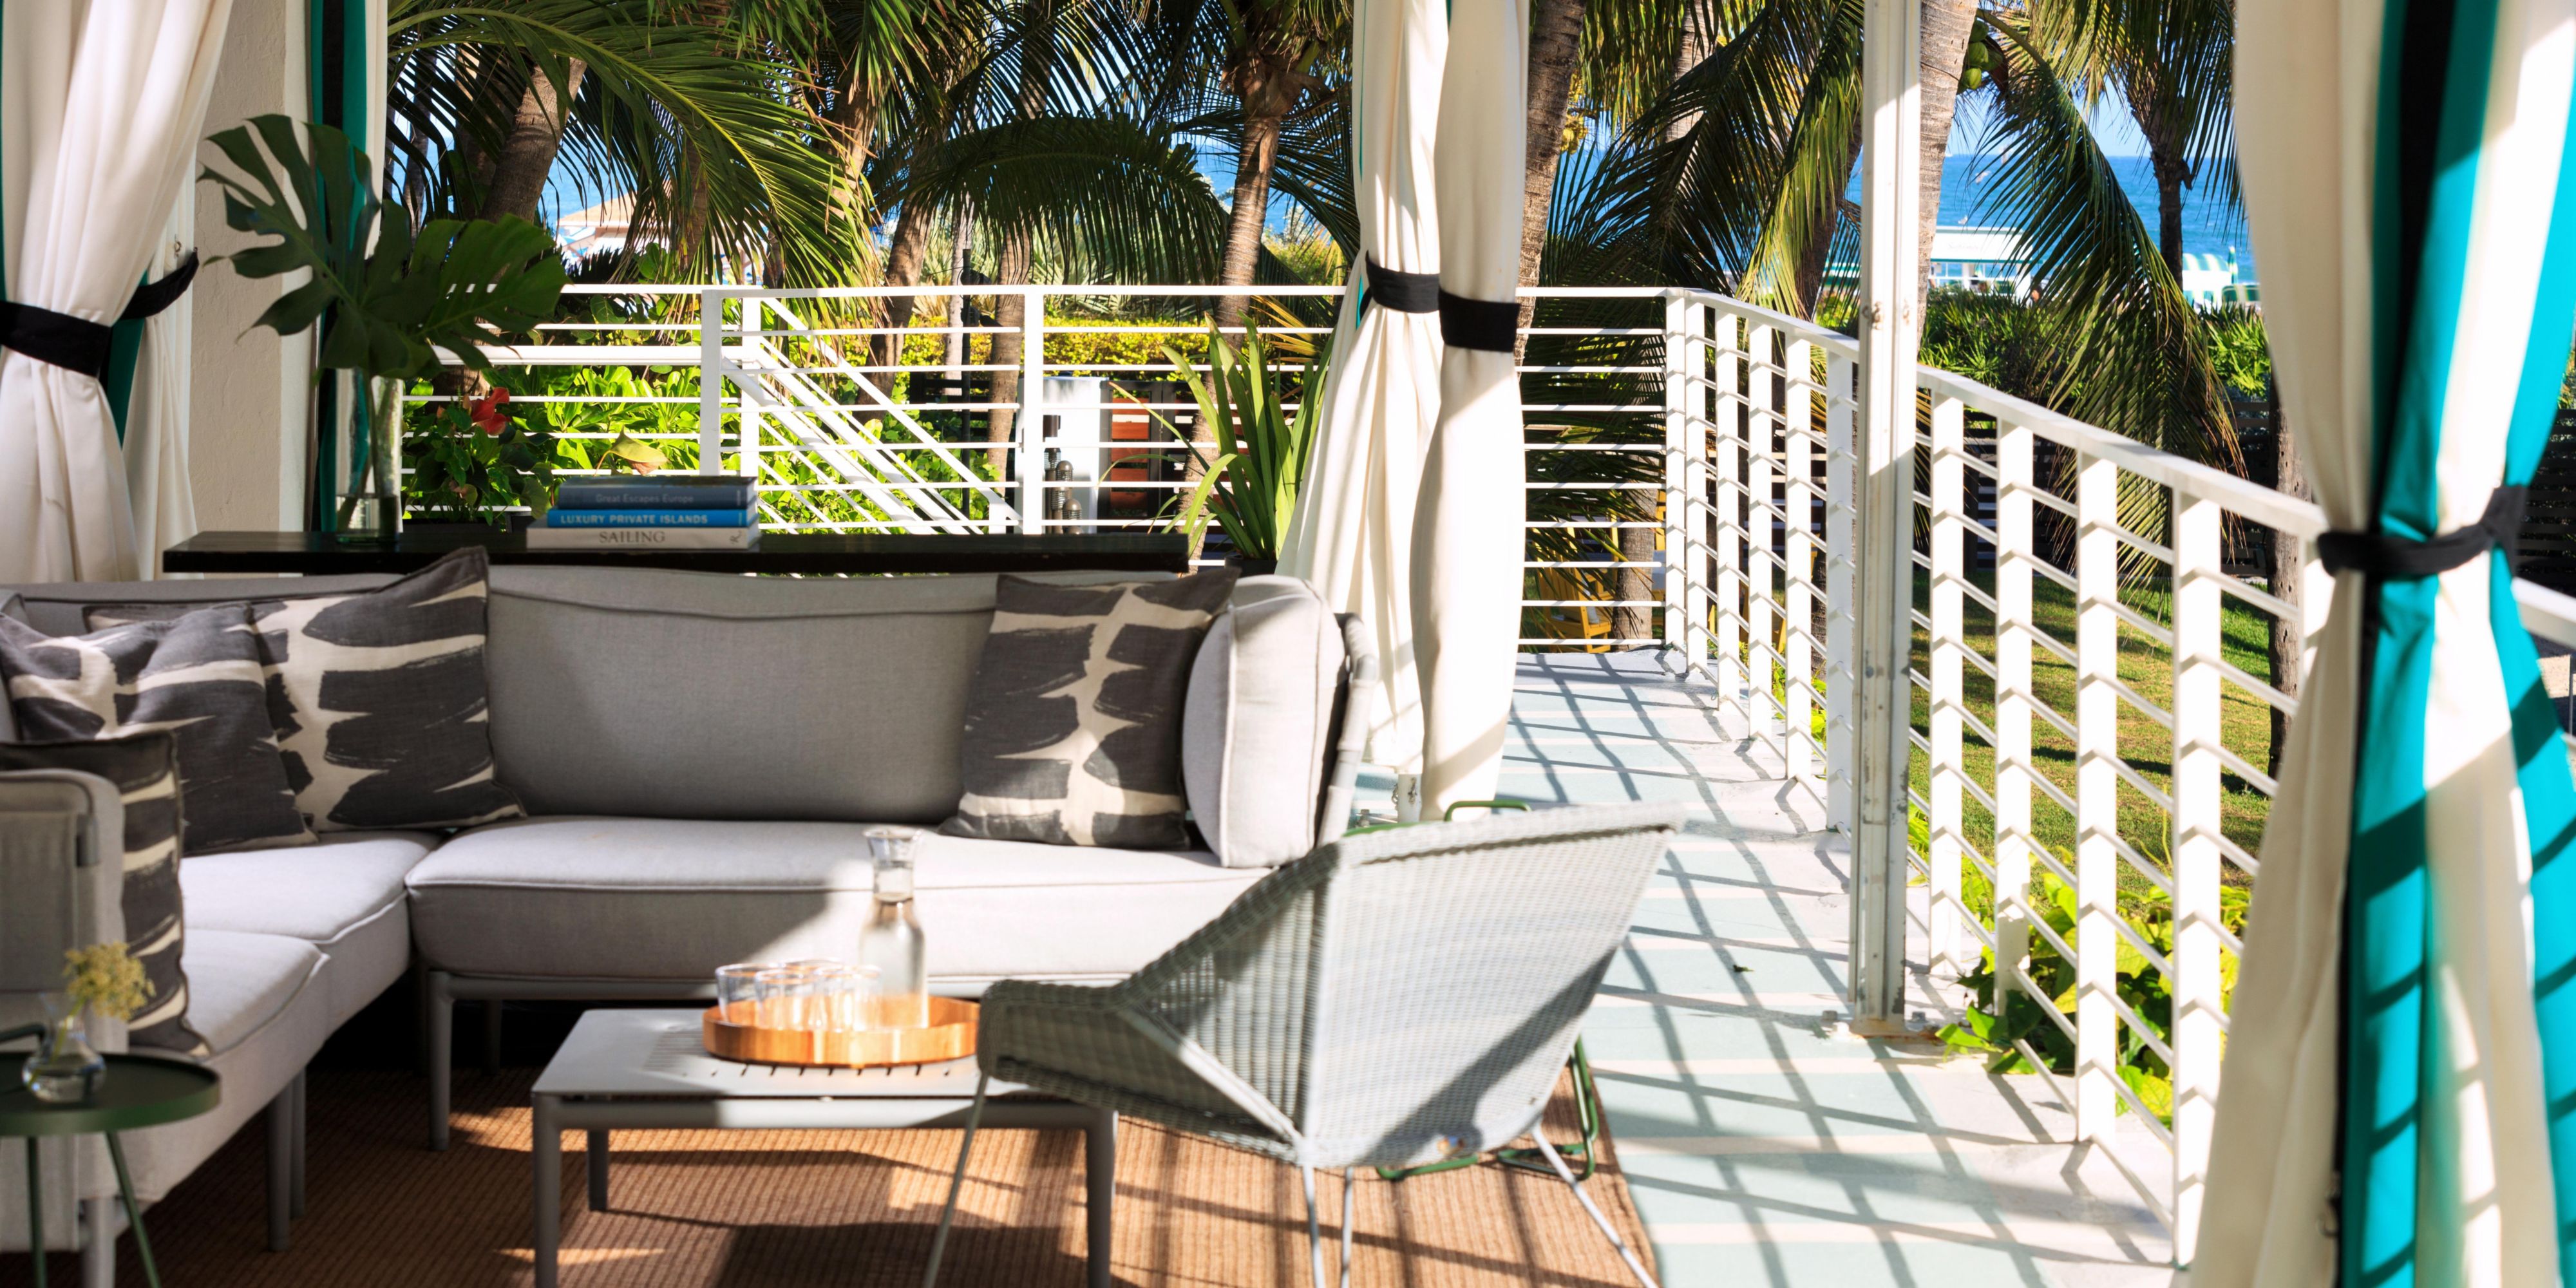 Want to stay awhile? Book one of the Surfcomber’s Vines Cabanas for the afternoon. Comfy couches? Check. Big-screen TVs? Yep. 7 of your closest friends living their best lives in a private ocean-view lounge? You got it. Plus, order anything you like from the High Tide menu.